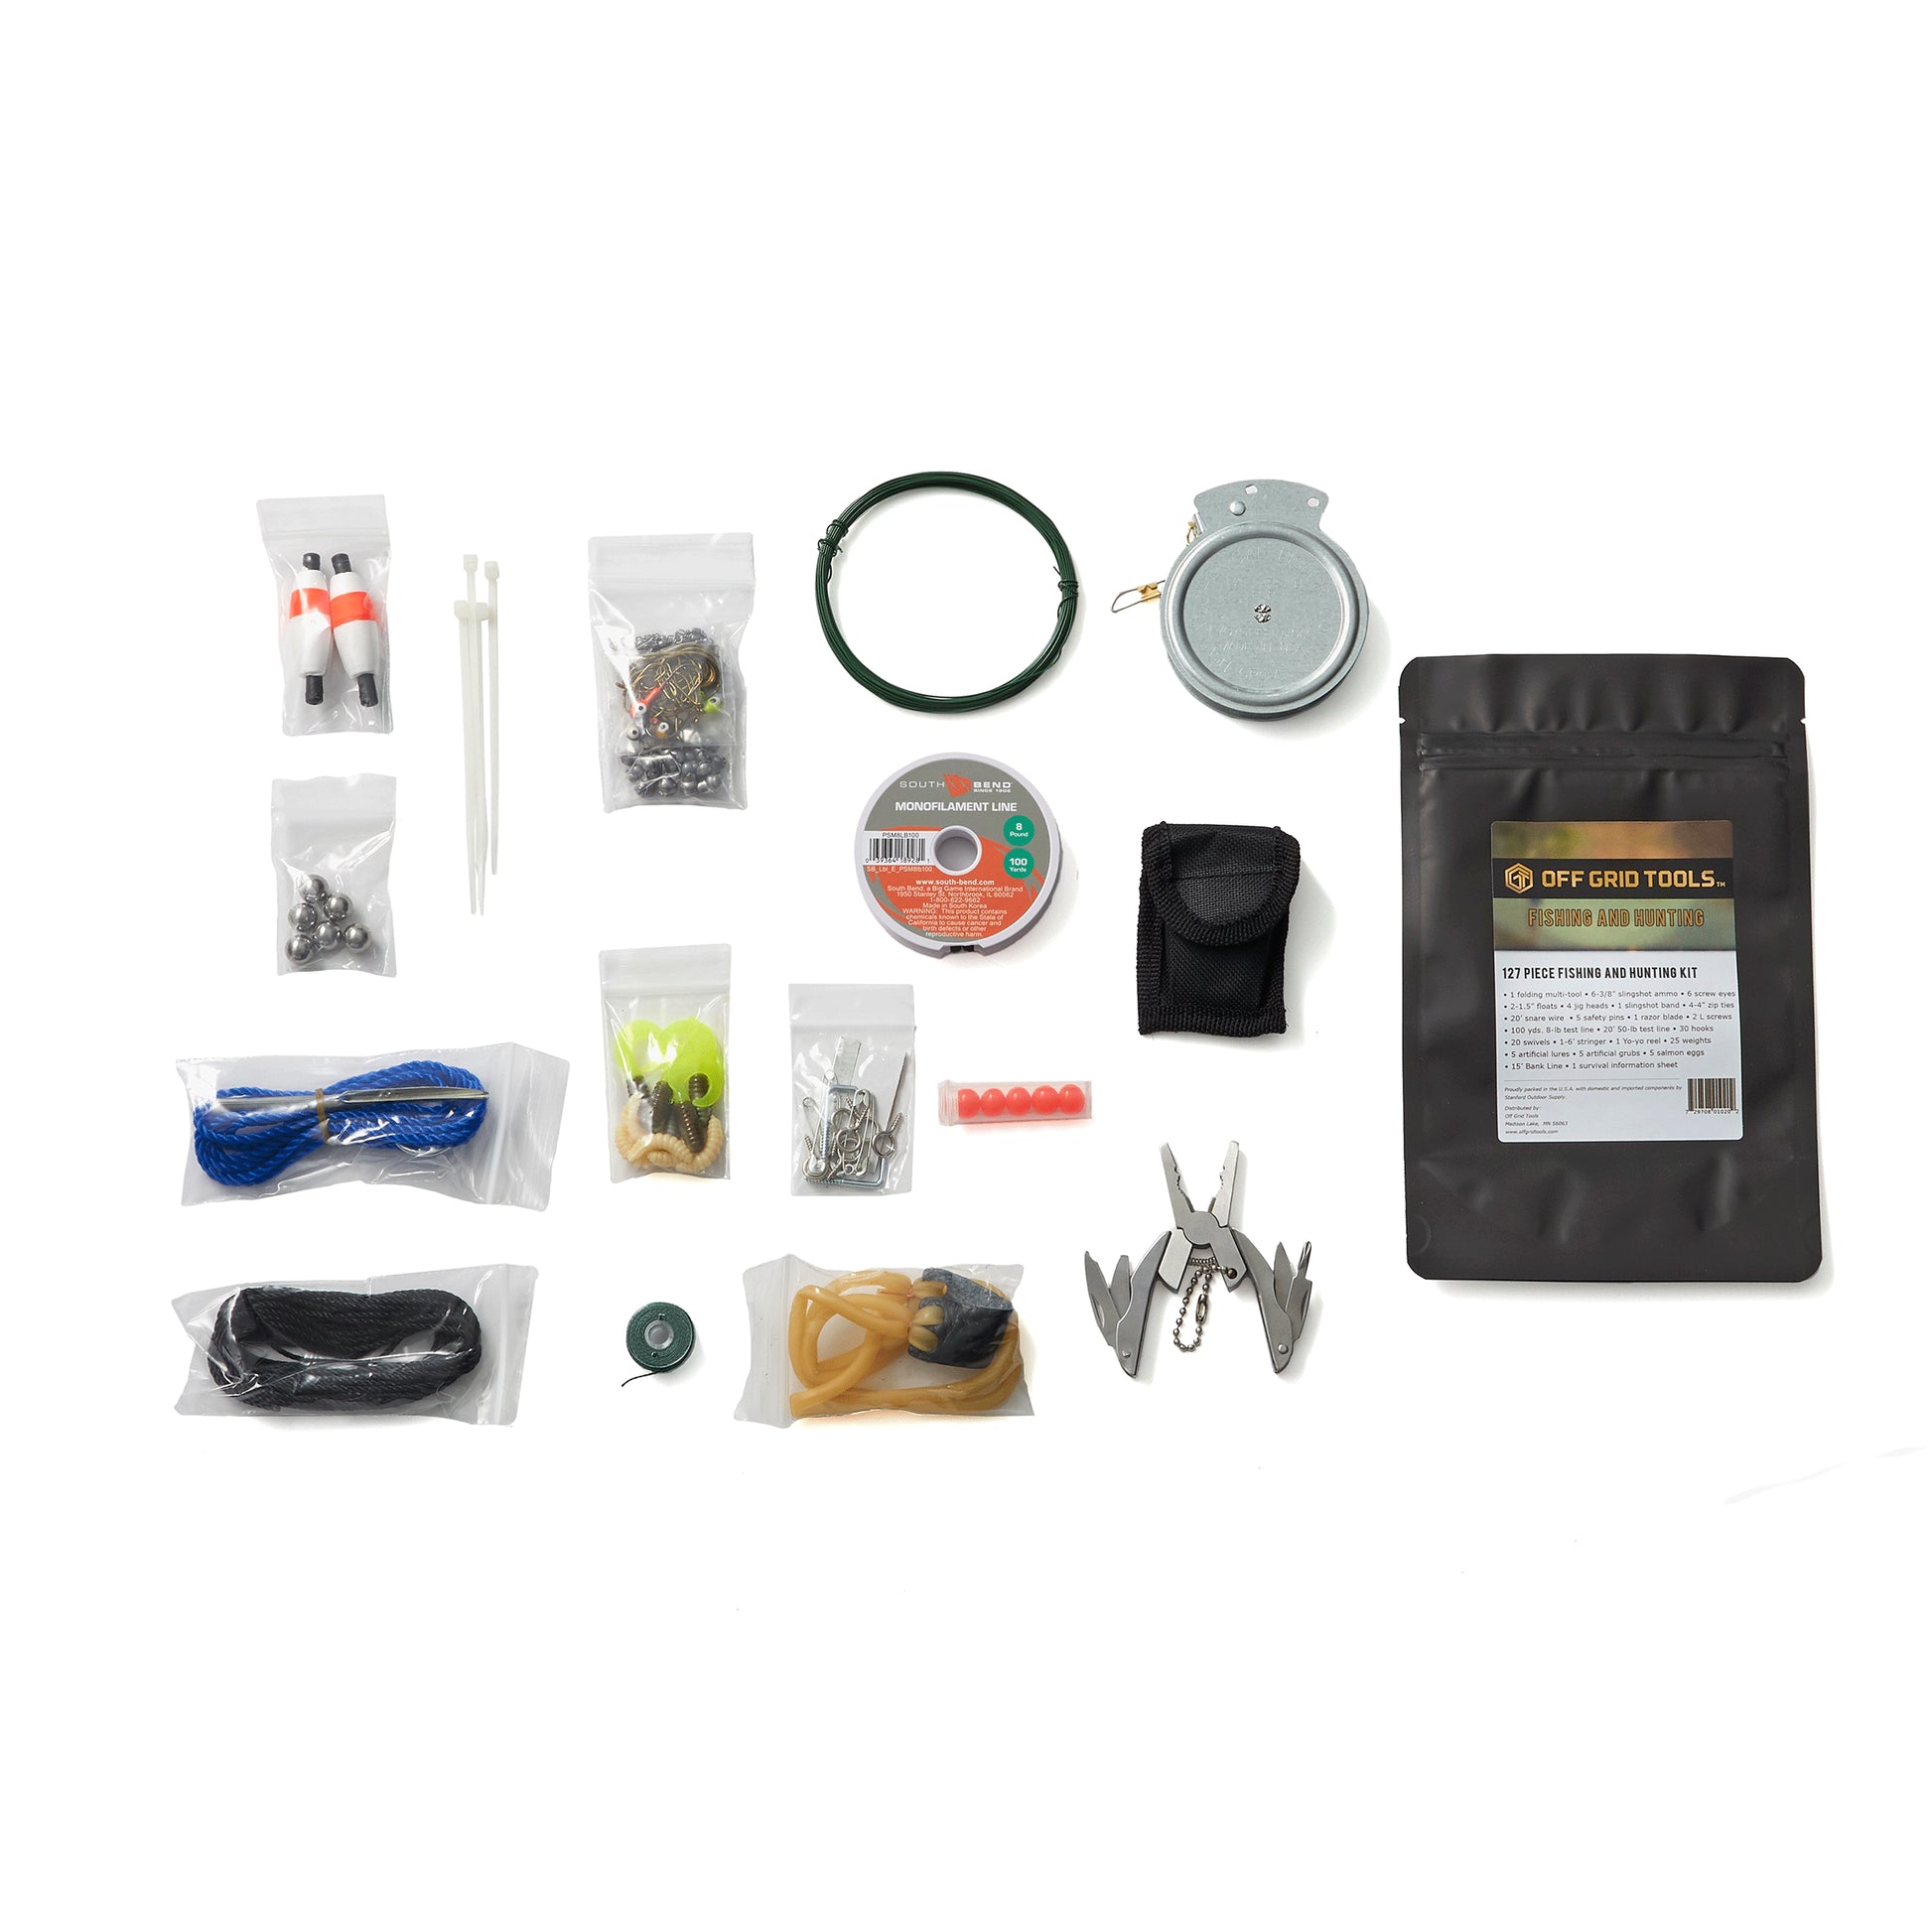 Kit #4 Full Survival Snaring Kit with Survival Snaring DVD